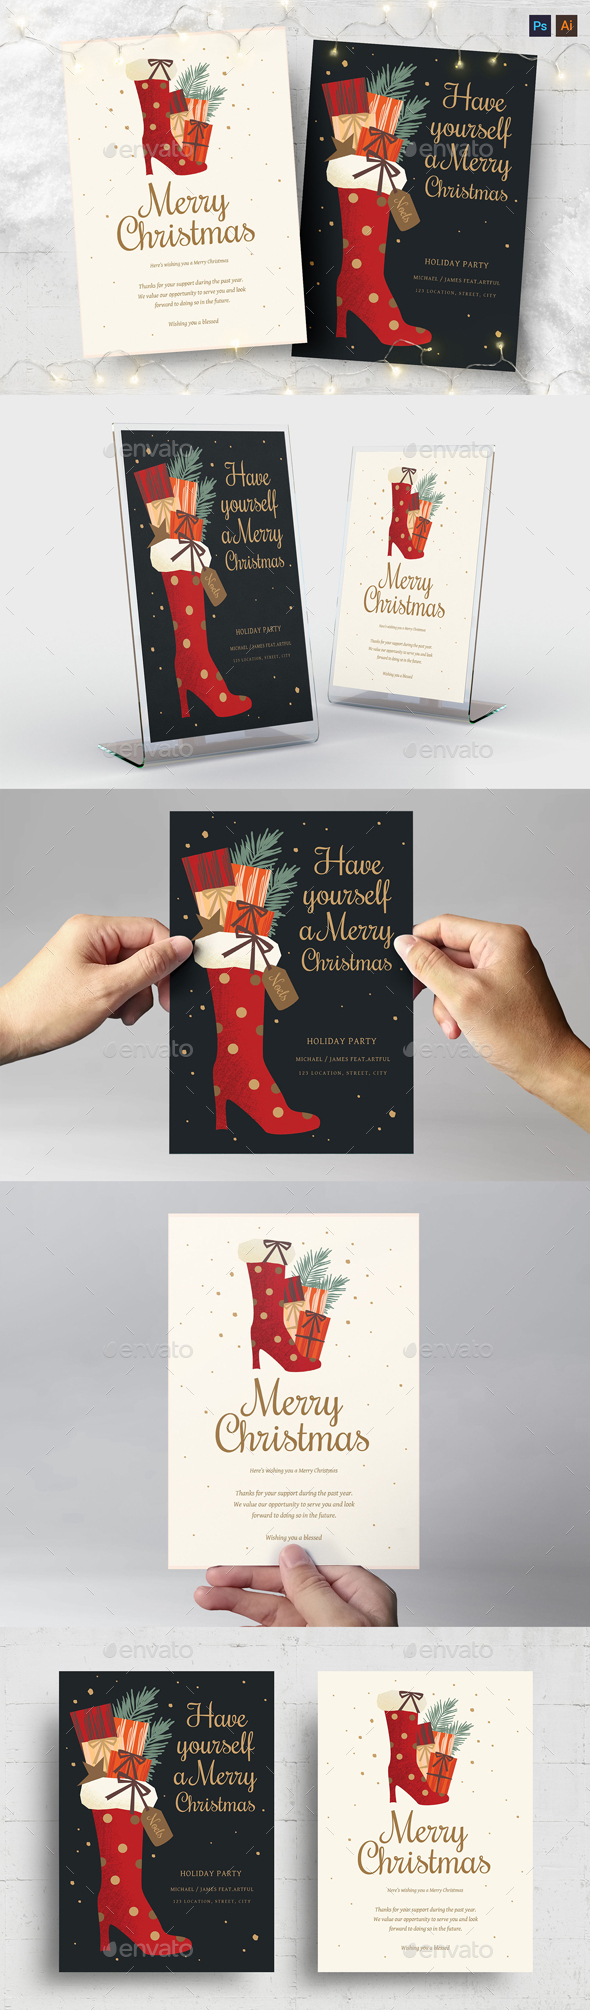 Christmas Card with Festive Stocking